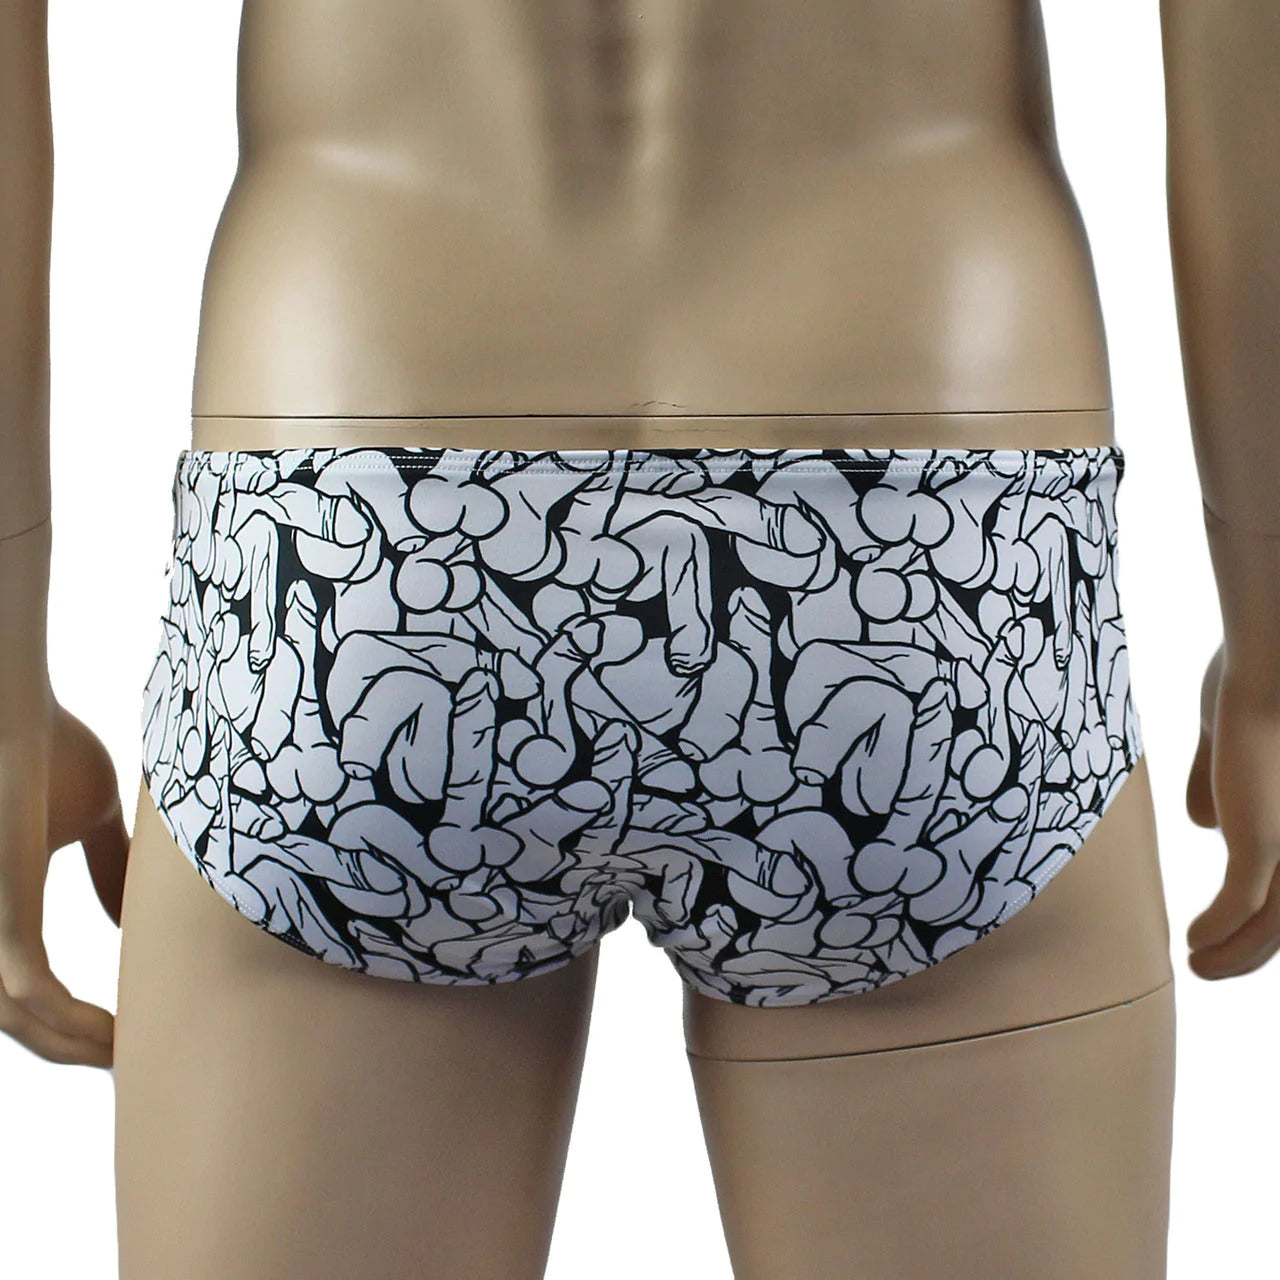 SALE - Male Willie Boxer Brief with Naughty Print Black and White